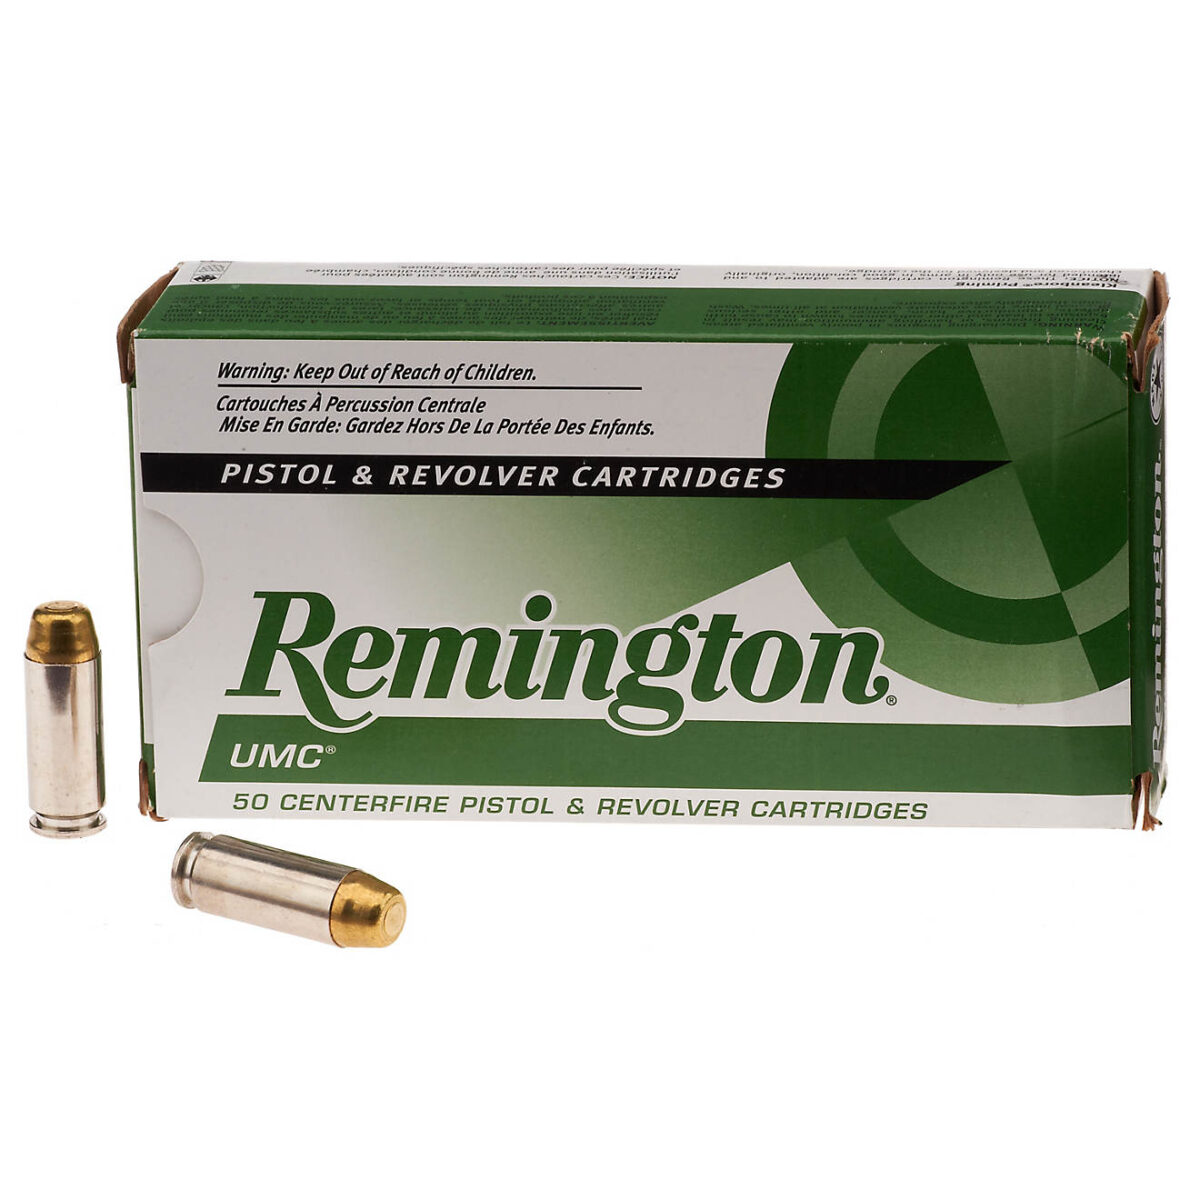 BUY AMMO ONLINE NOW , BULK PRIMERS AVAAILABLE IN STOCK AT MODERATE AND AFFORDABLE PRICES , BUY .300 AAC BLACKOUT ONLINE NOW IN STOCK.